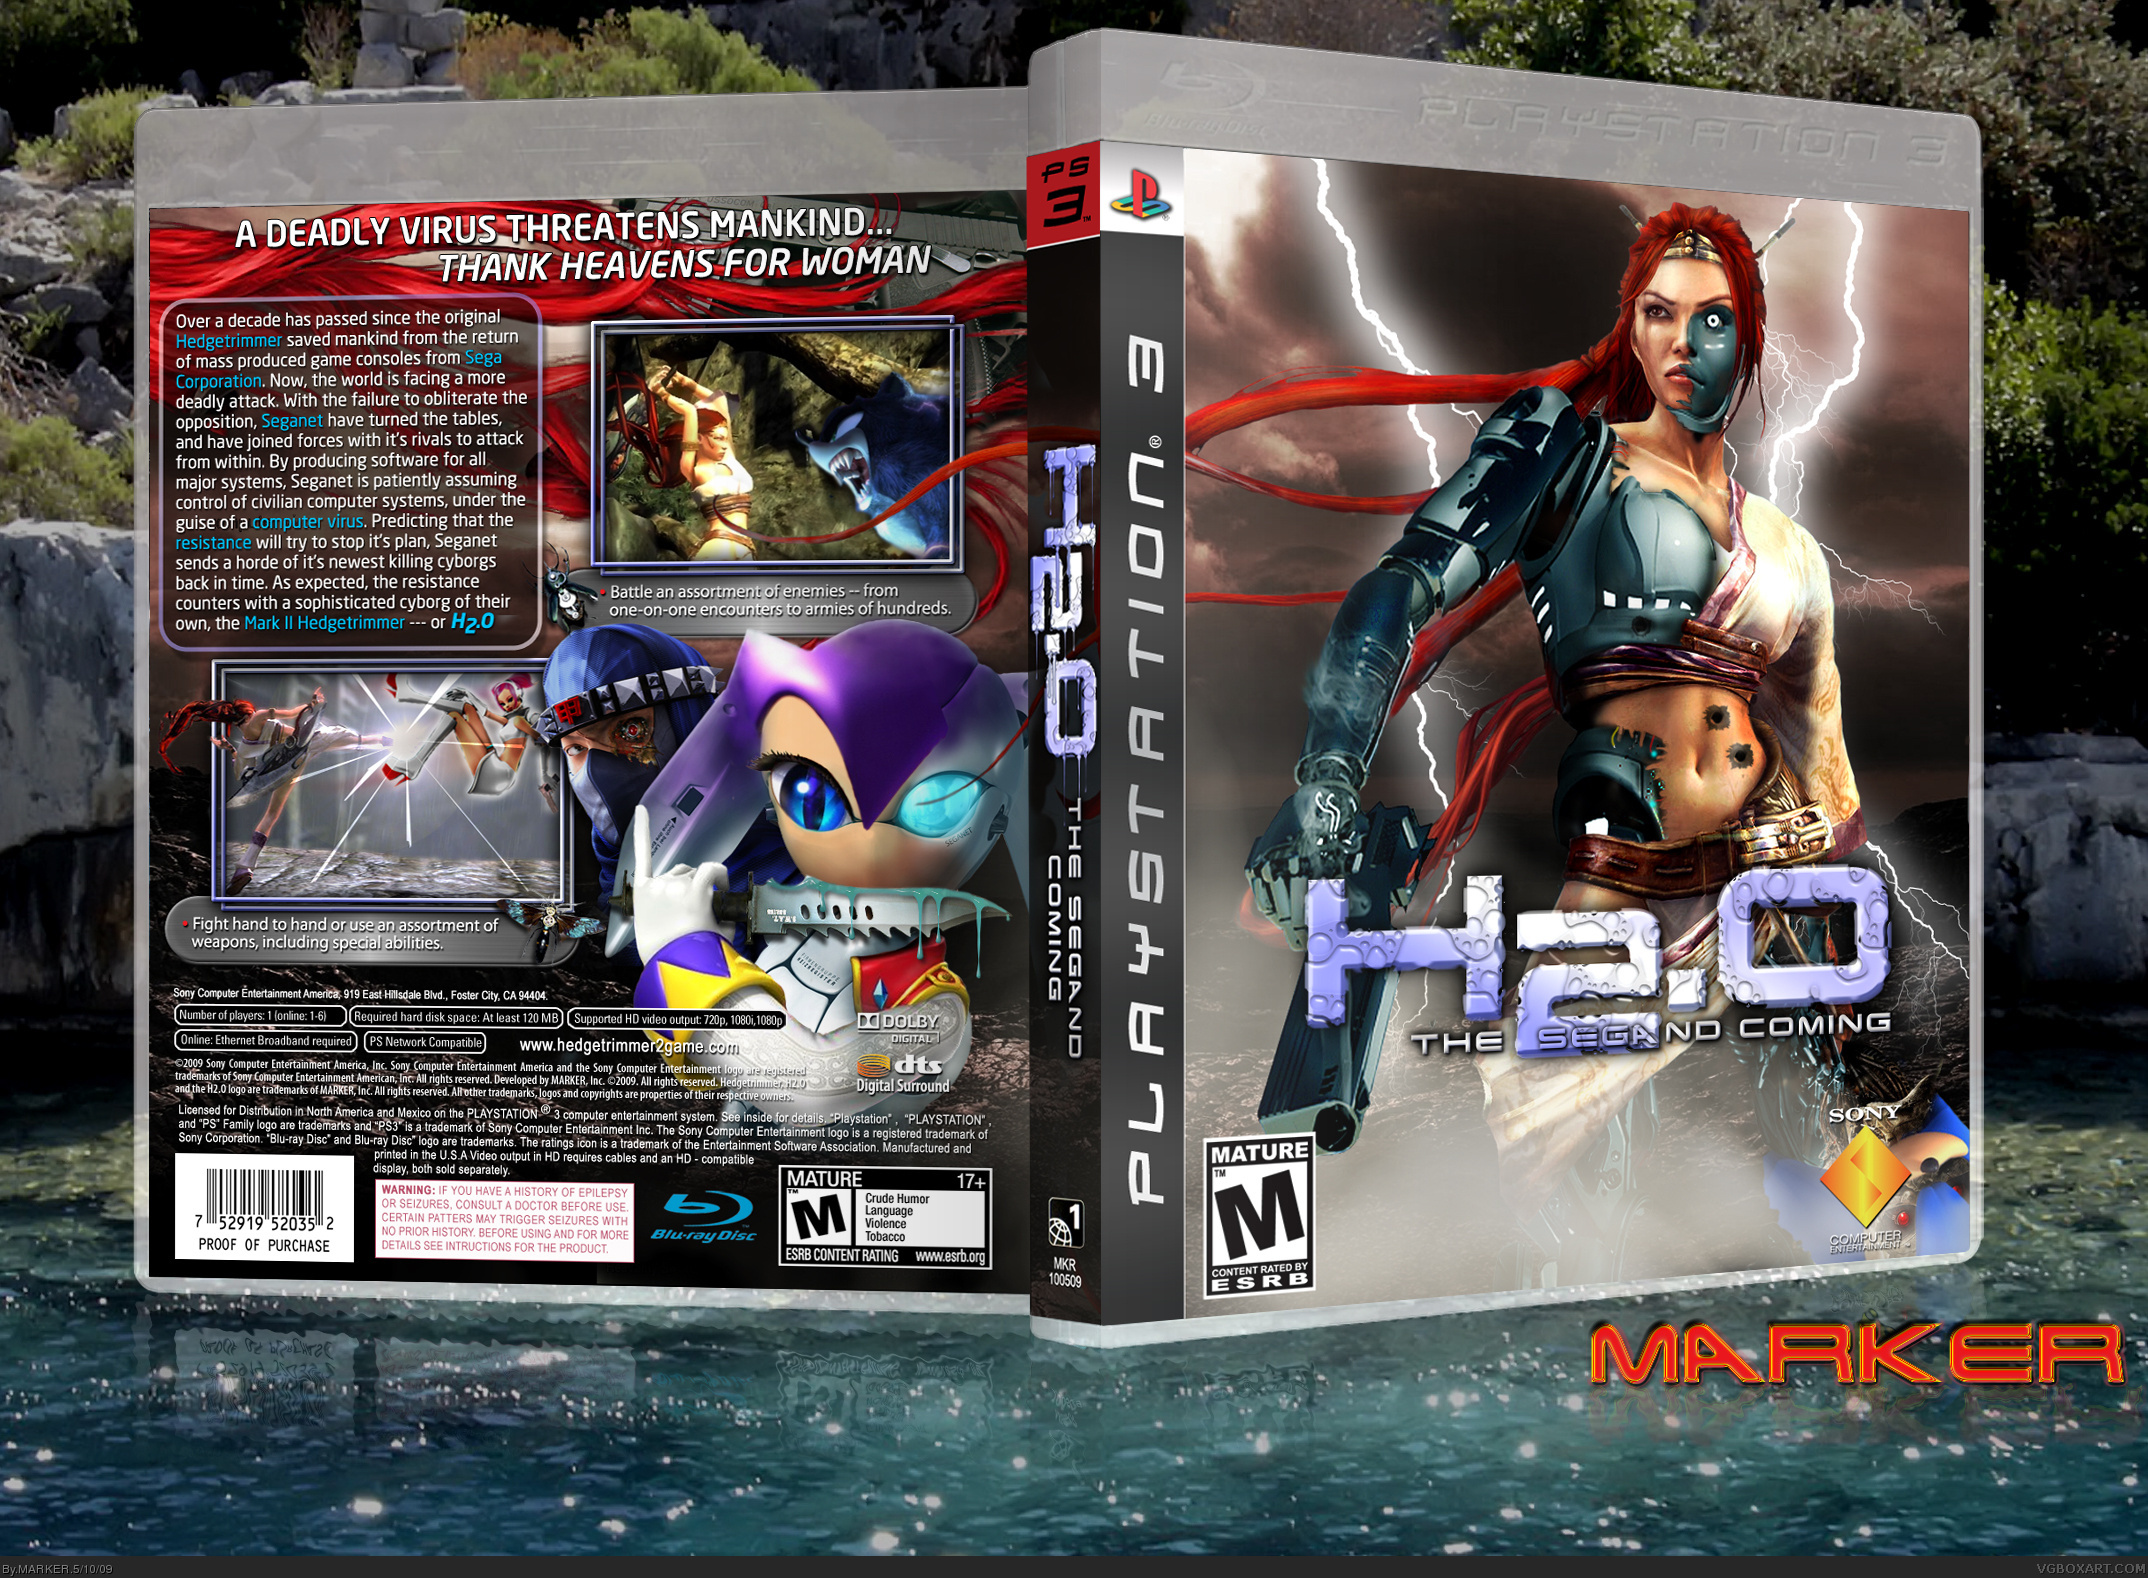 H2.O - The Segand Coming box cover